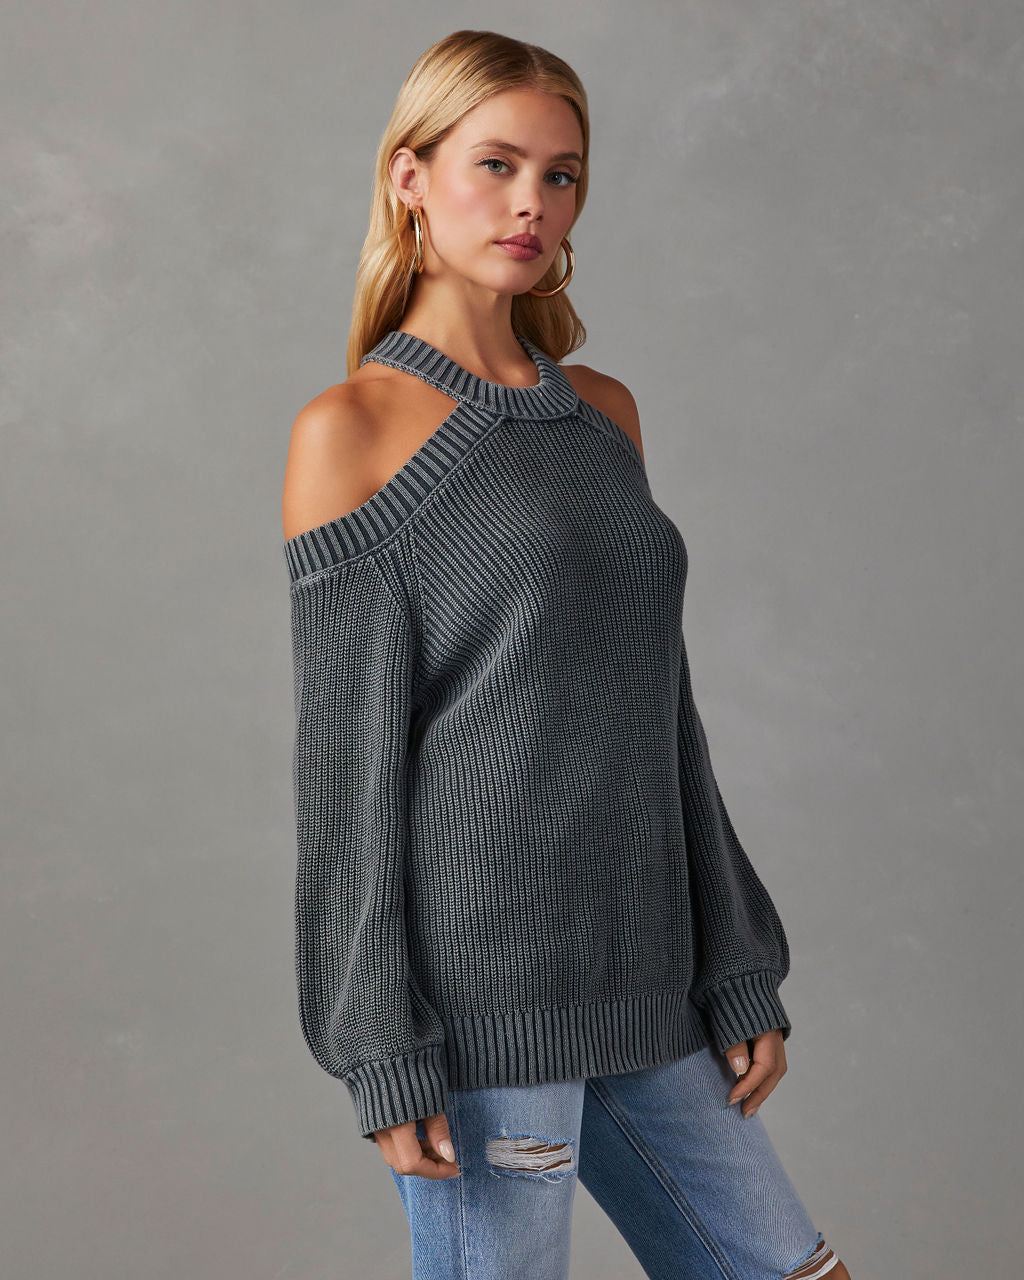  AUSEVO Sweaters for Women Contrast Lace Cold Shoulder